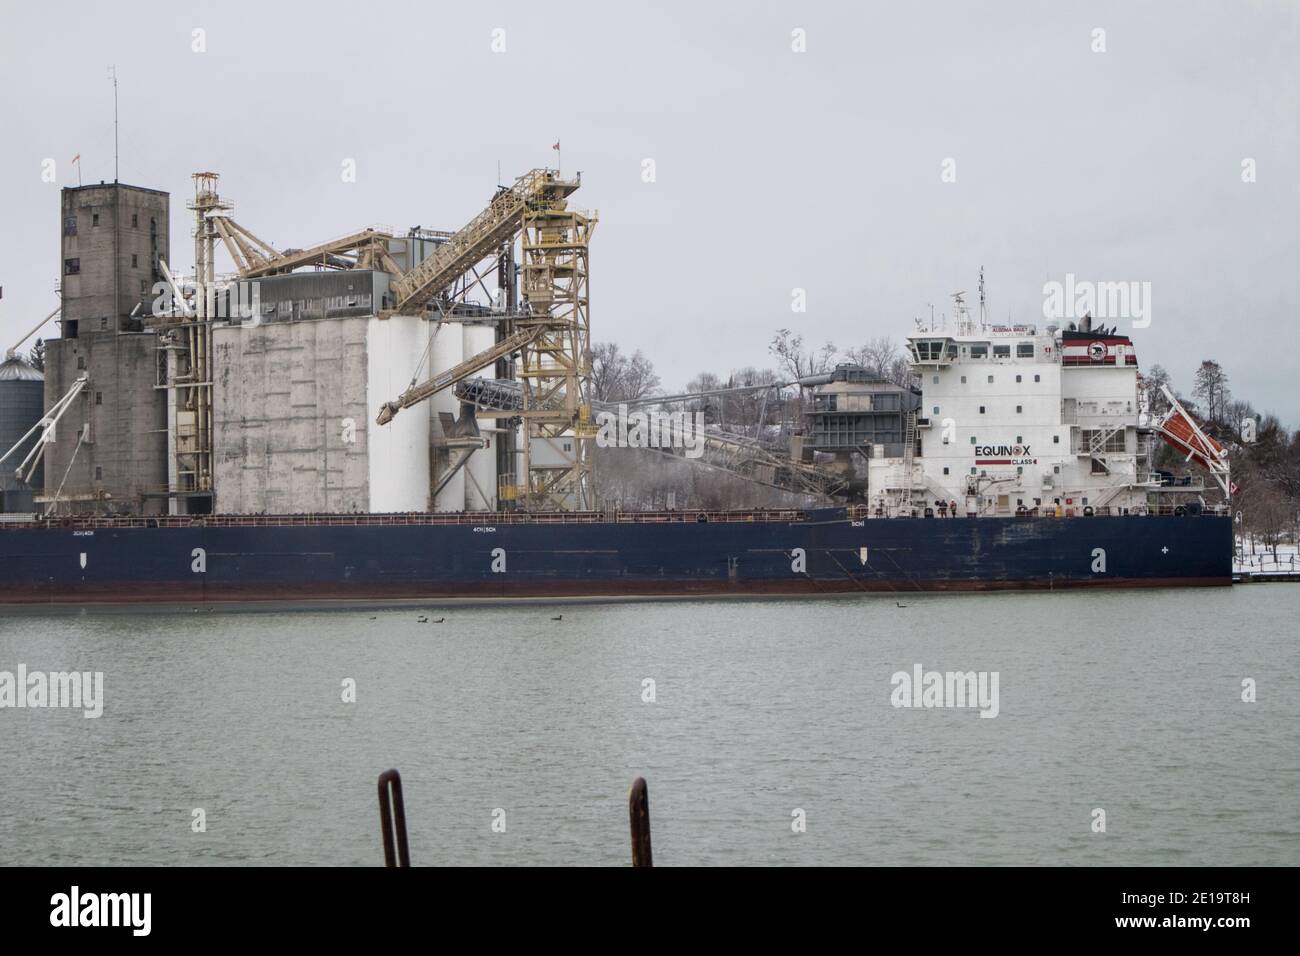 A large ship at the Port of Goderich large industrial facilities. Stock Photo